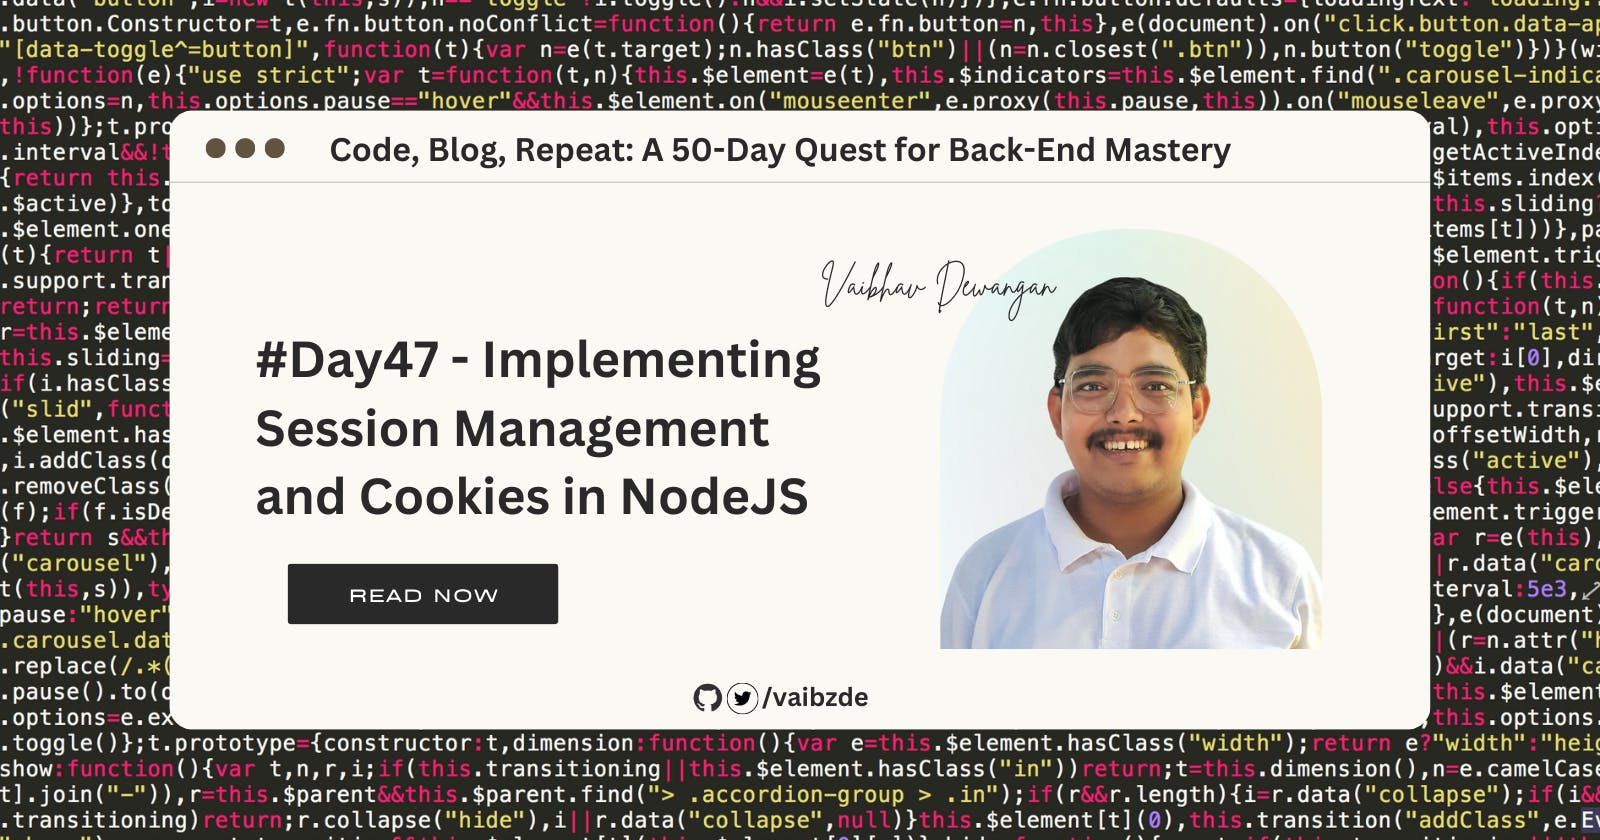 #Day47 - Implementing Session Management and Cookies in NodeJS